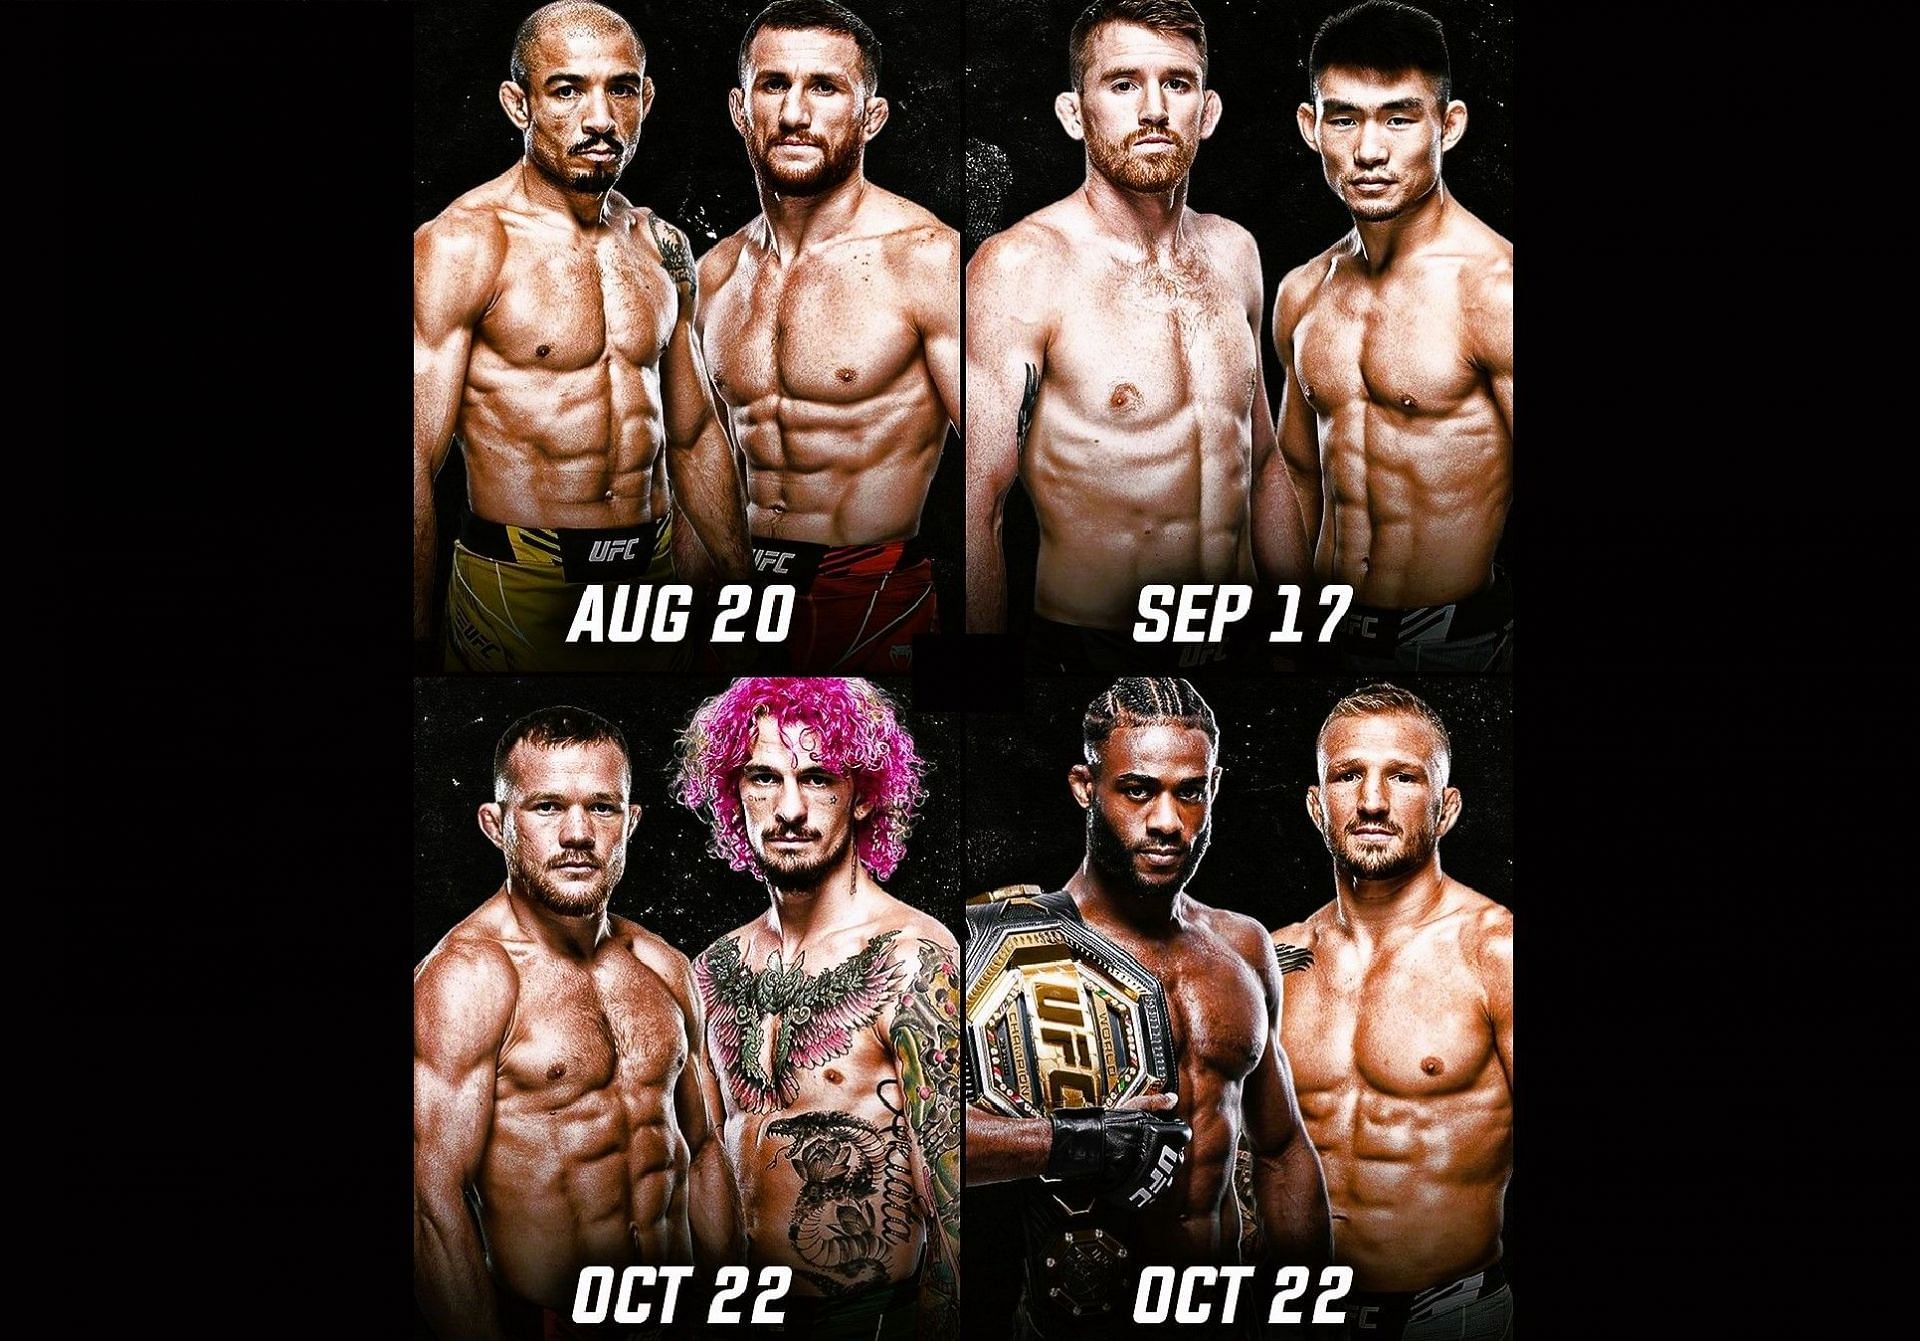 The UFC bantamweight division is heating up [Image via @diaztwinsmma on Instagram]